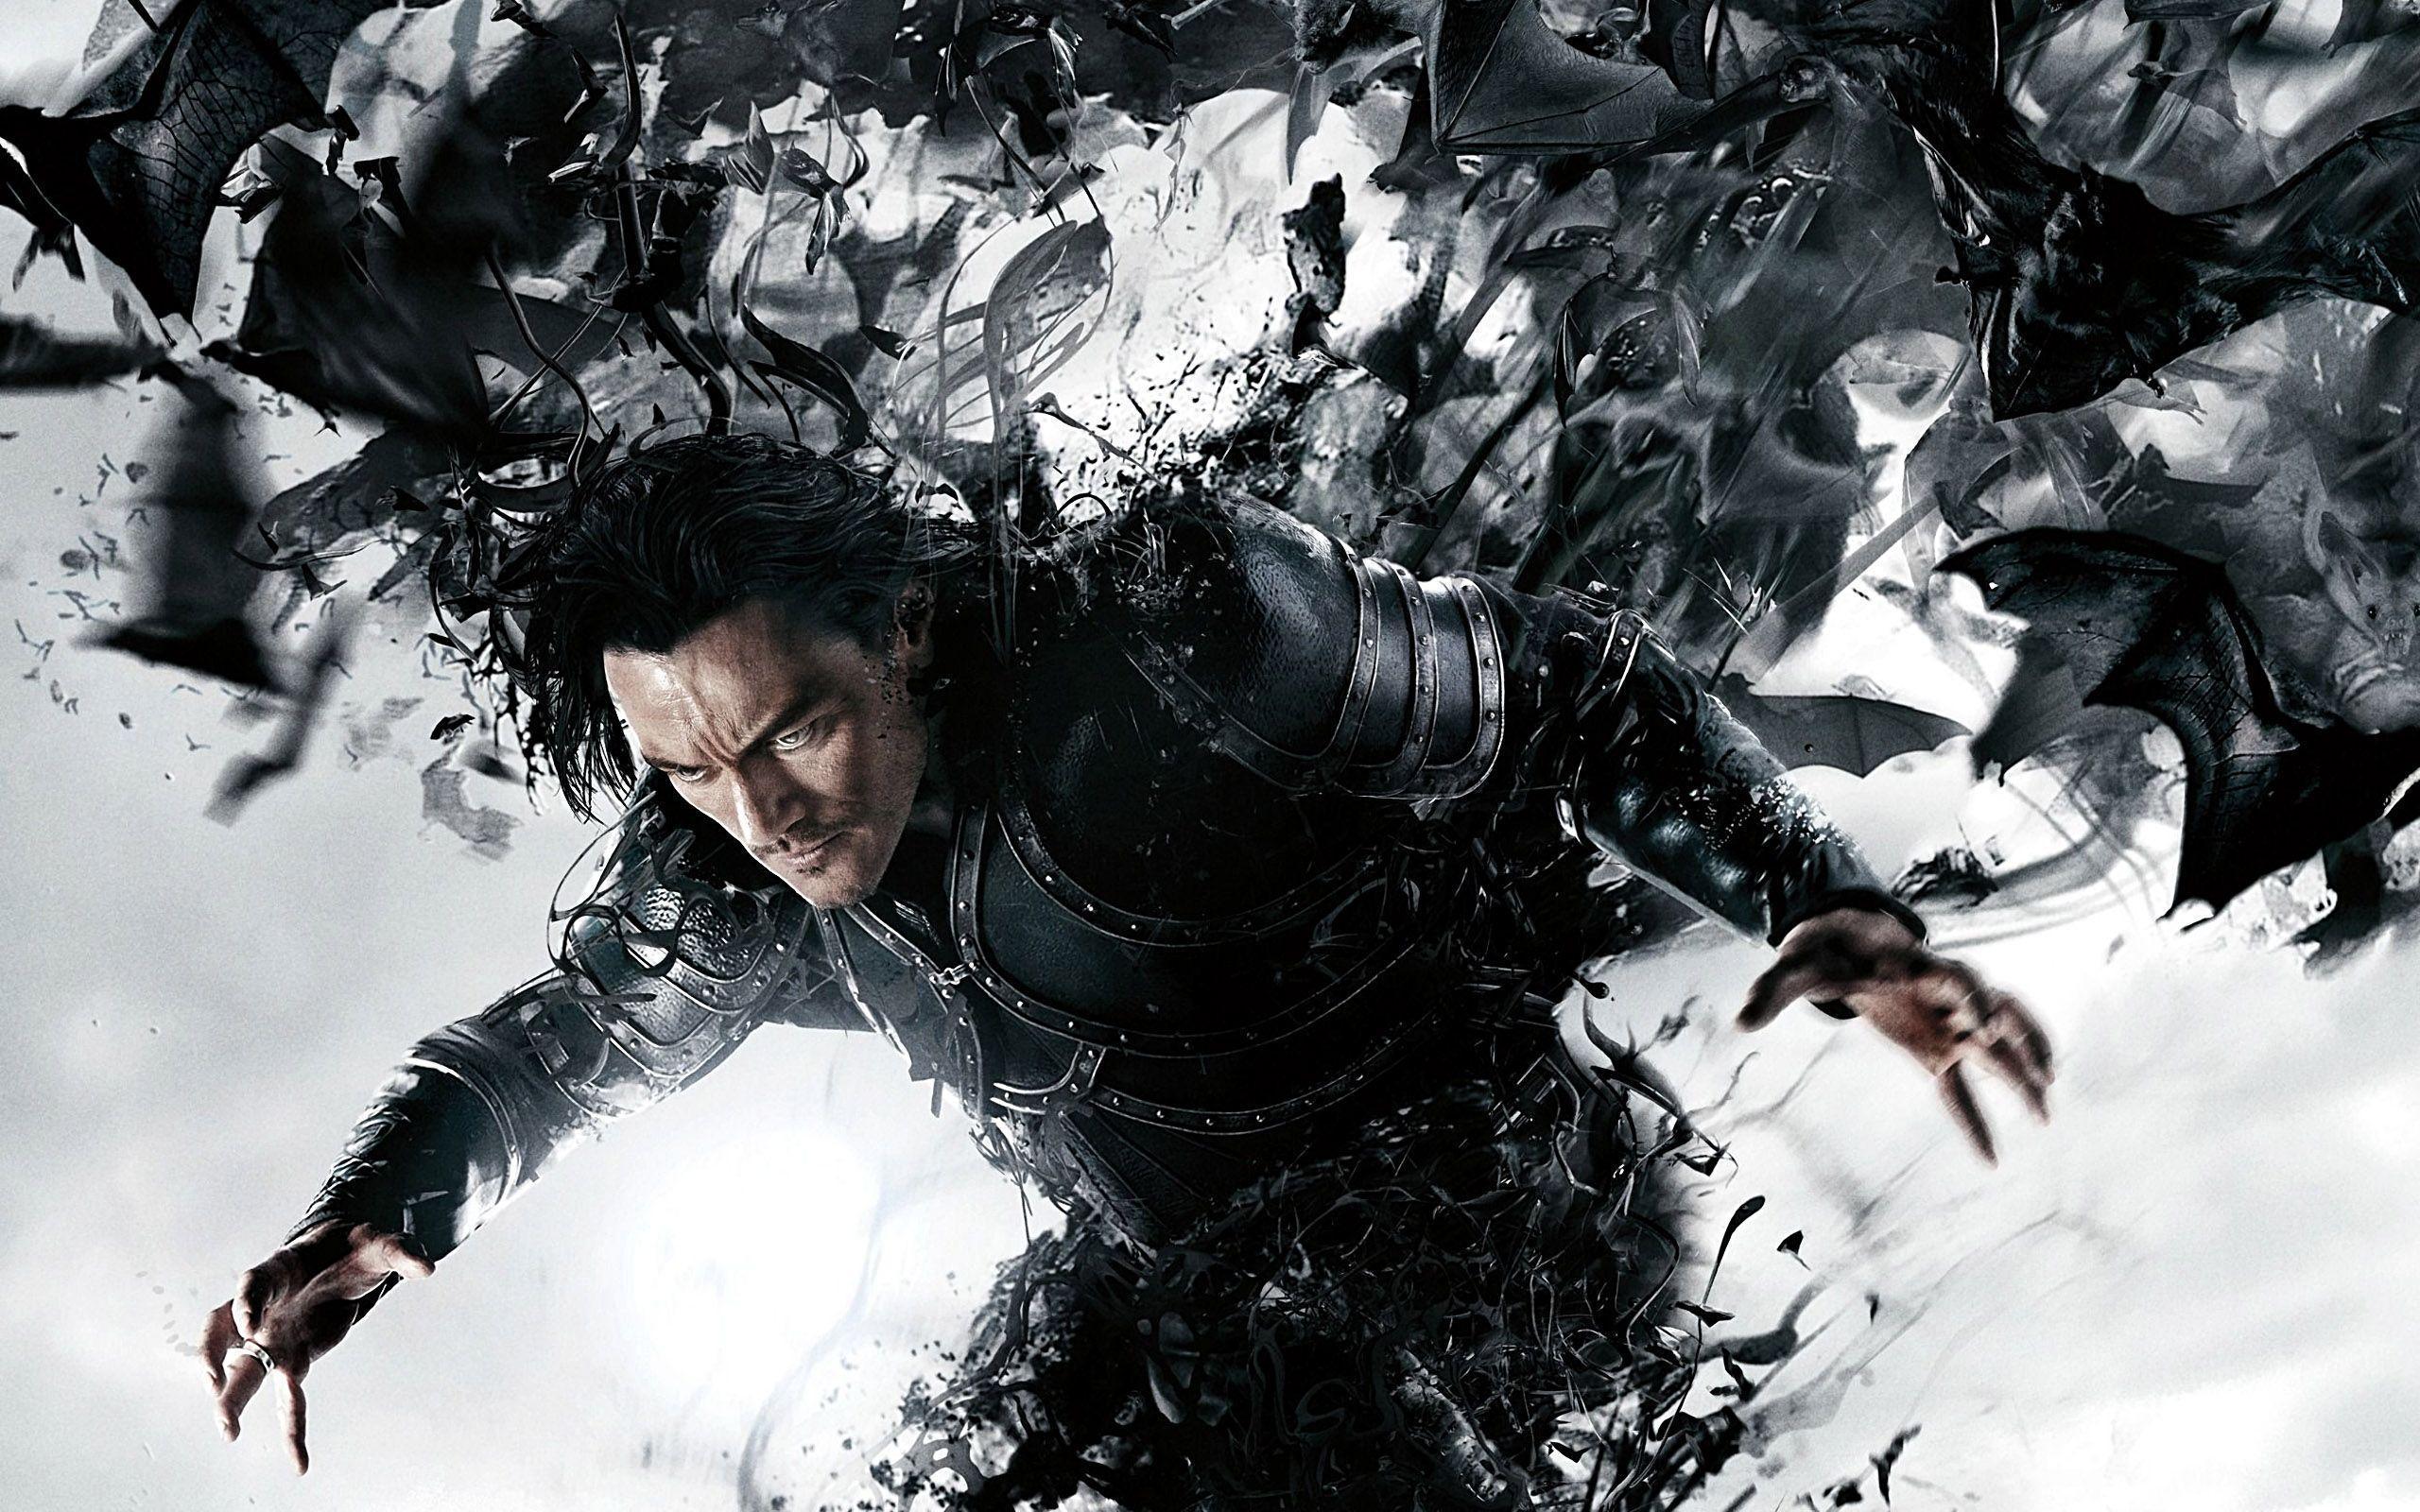 Dracula Untold IMAX Poster HD Wallpaper Wide or HD from Movies